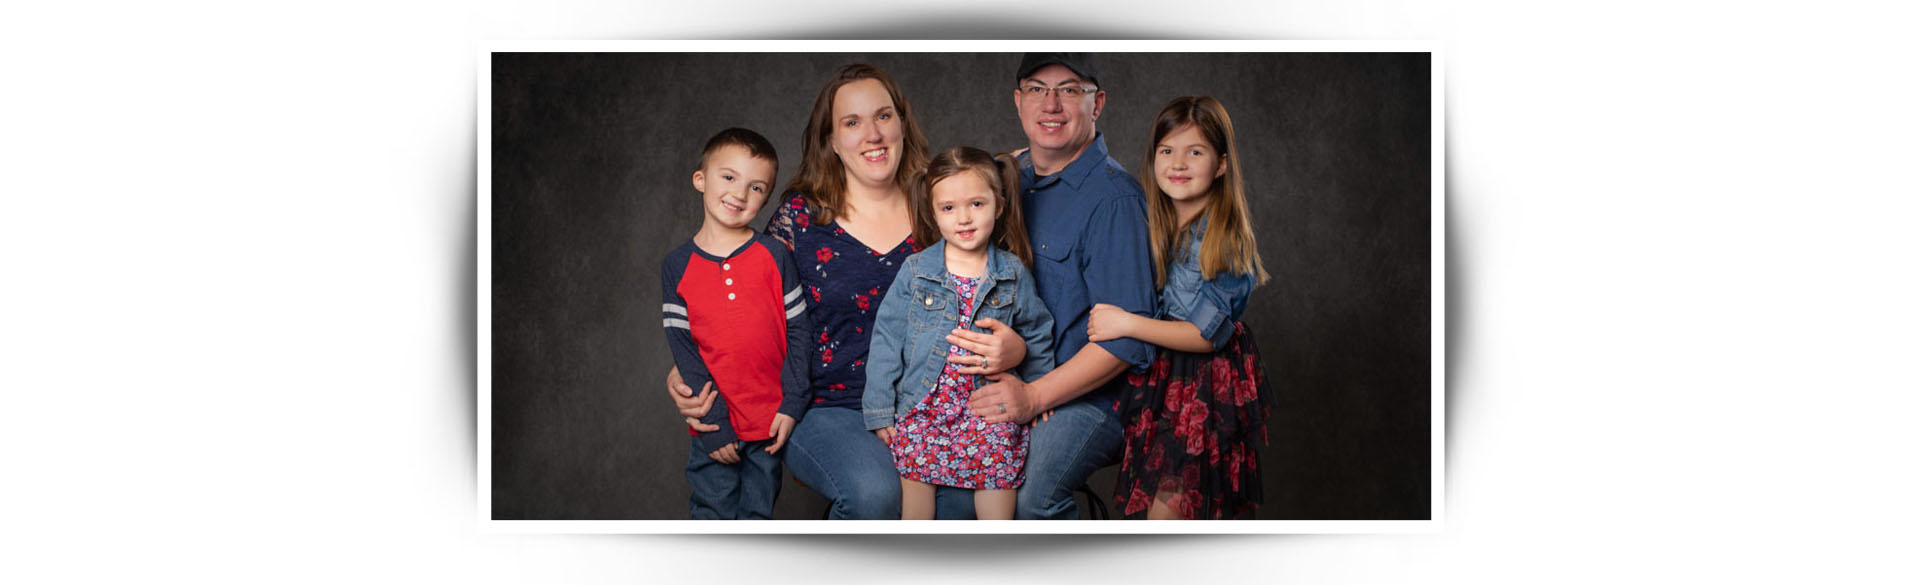 Labor of Love - CU College of Nursing Staff Abby Zamora and family